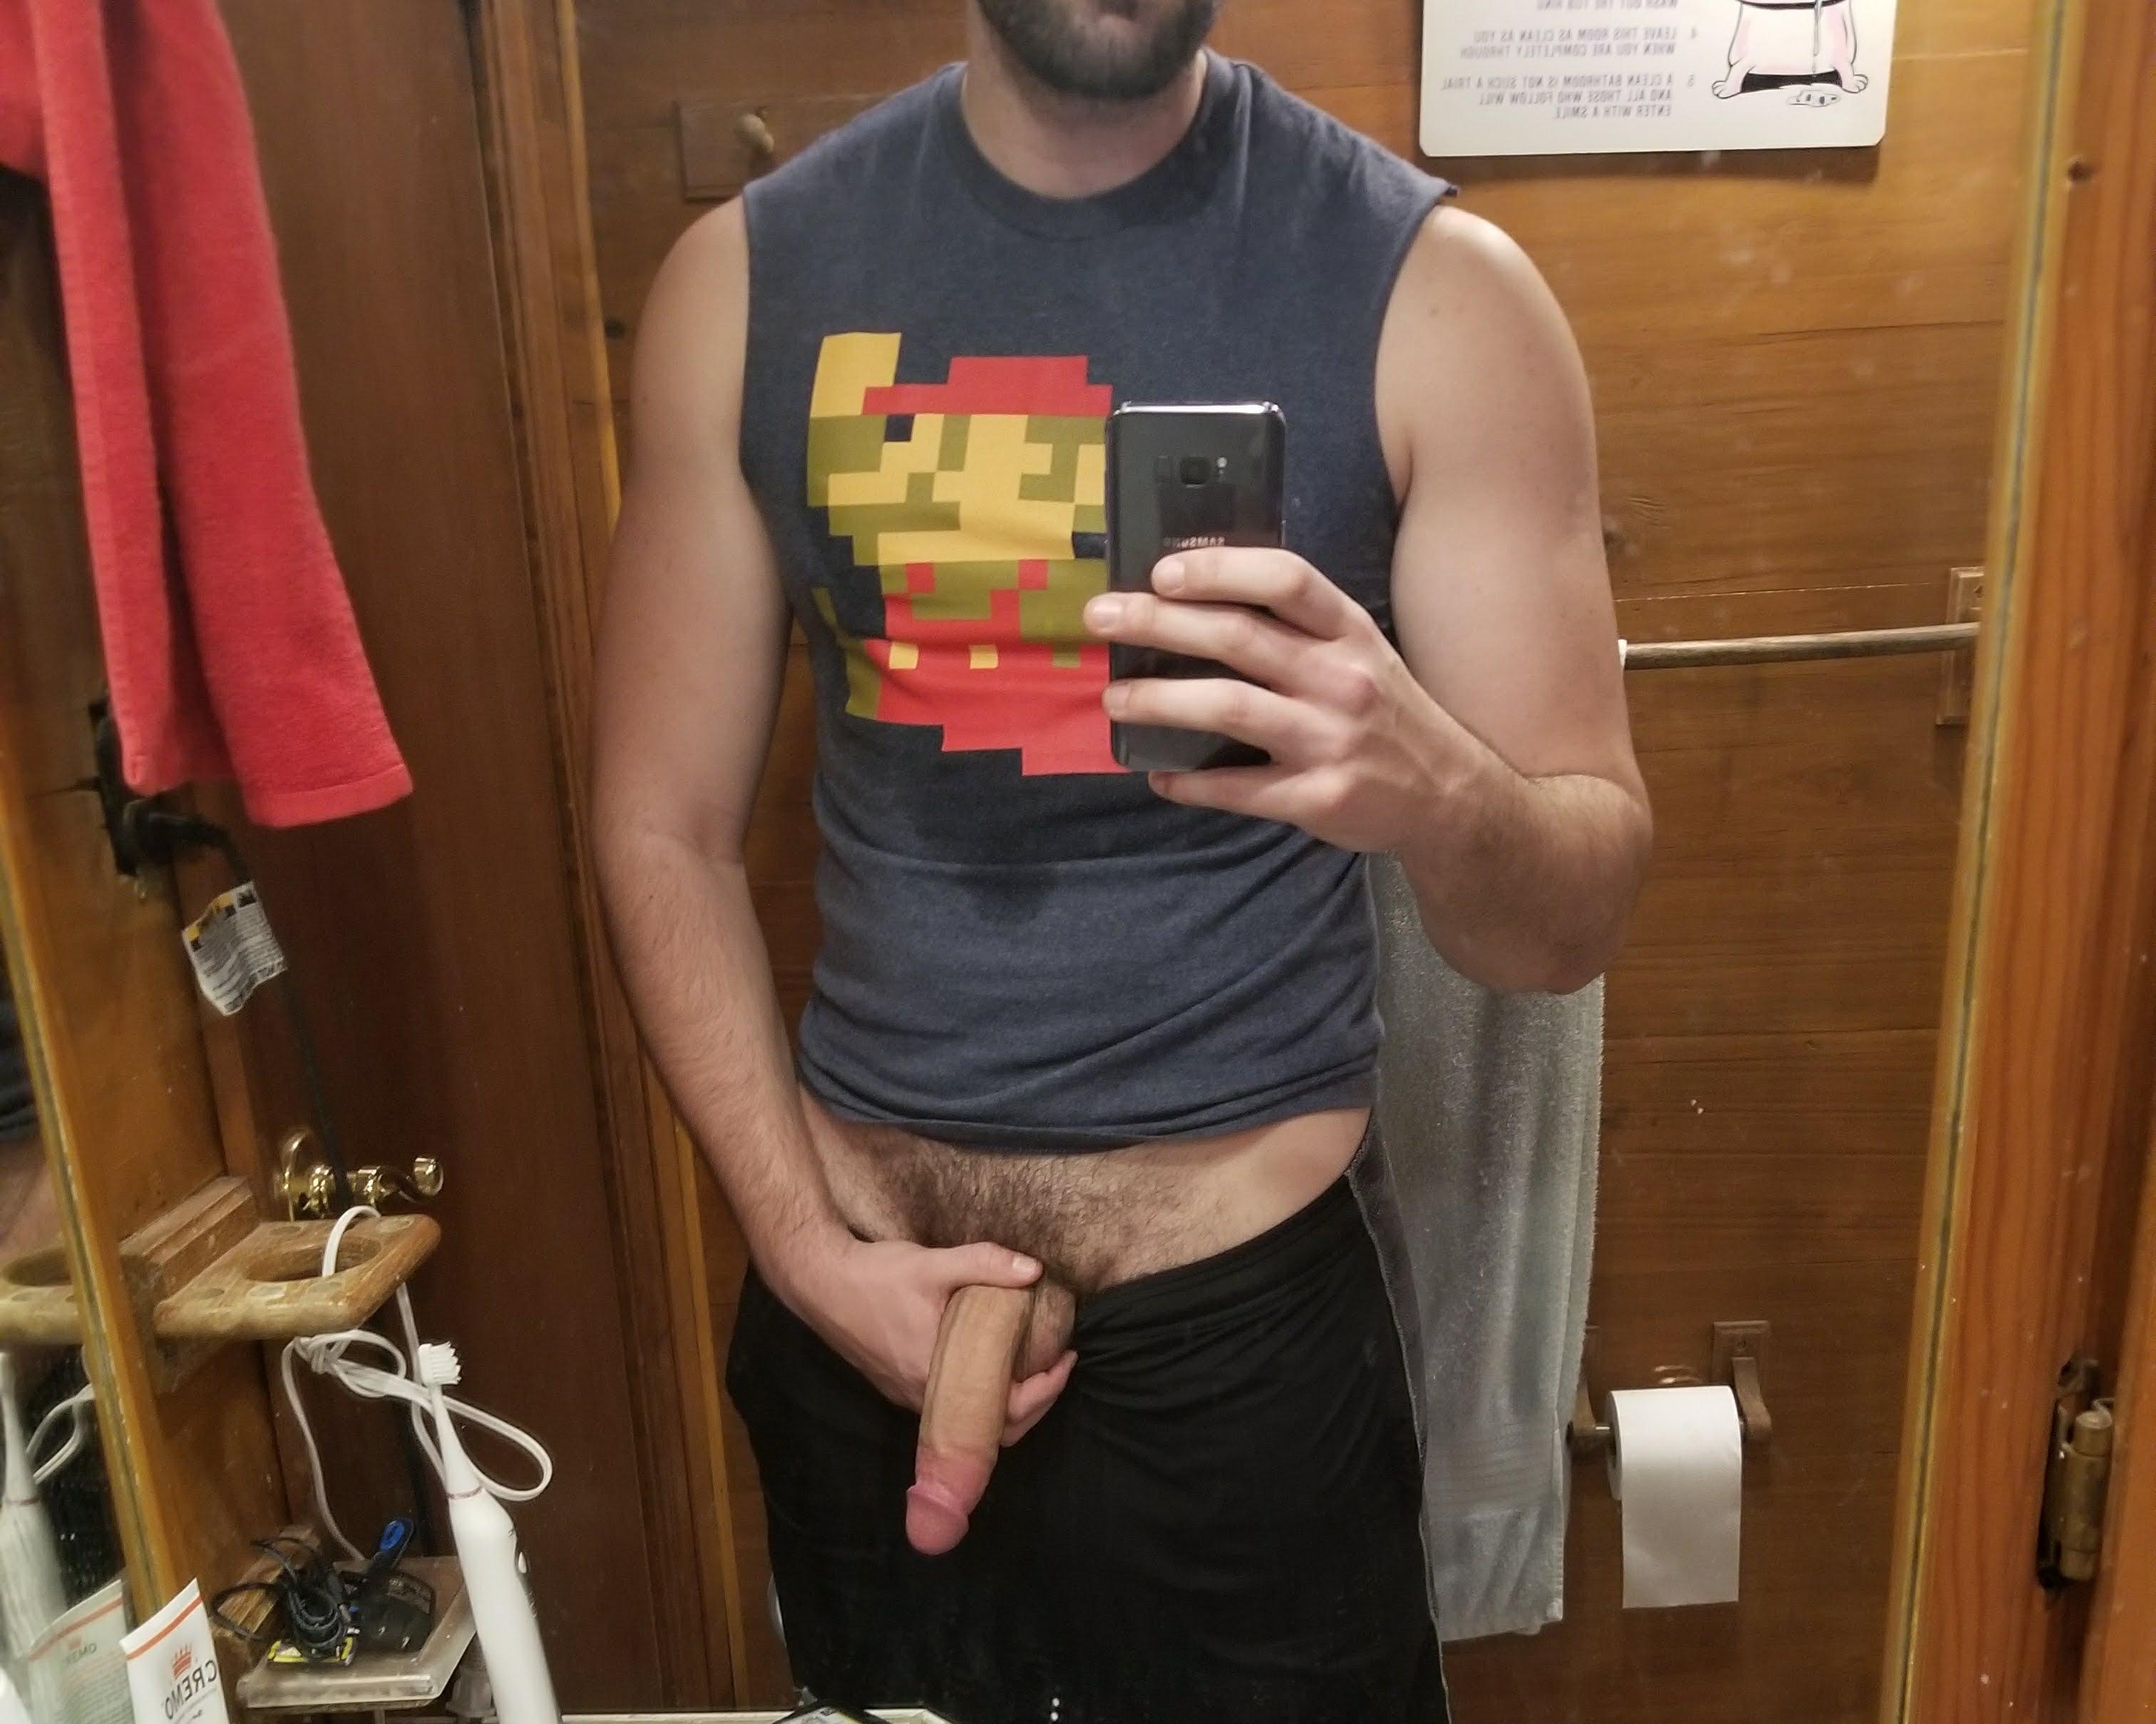 First post, post gy[m] pic. :-) nsfw